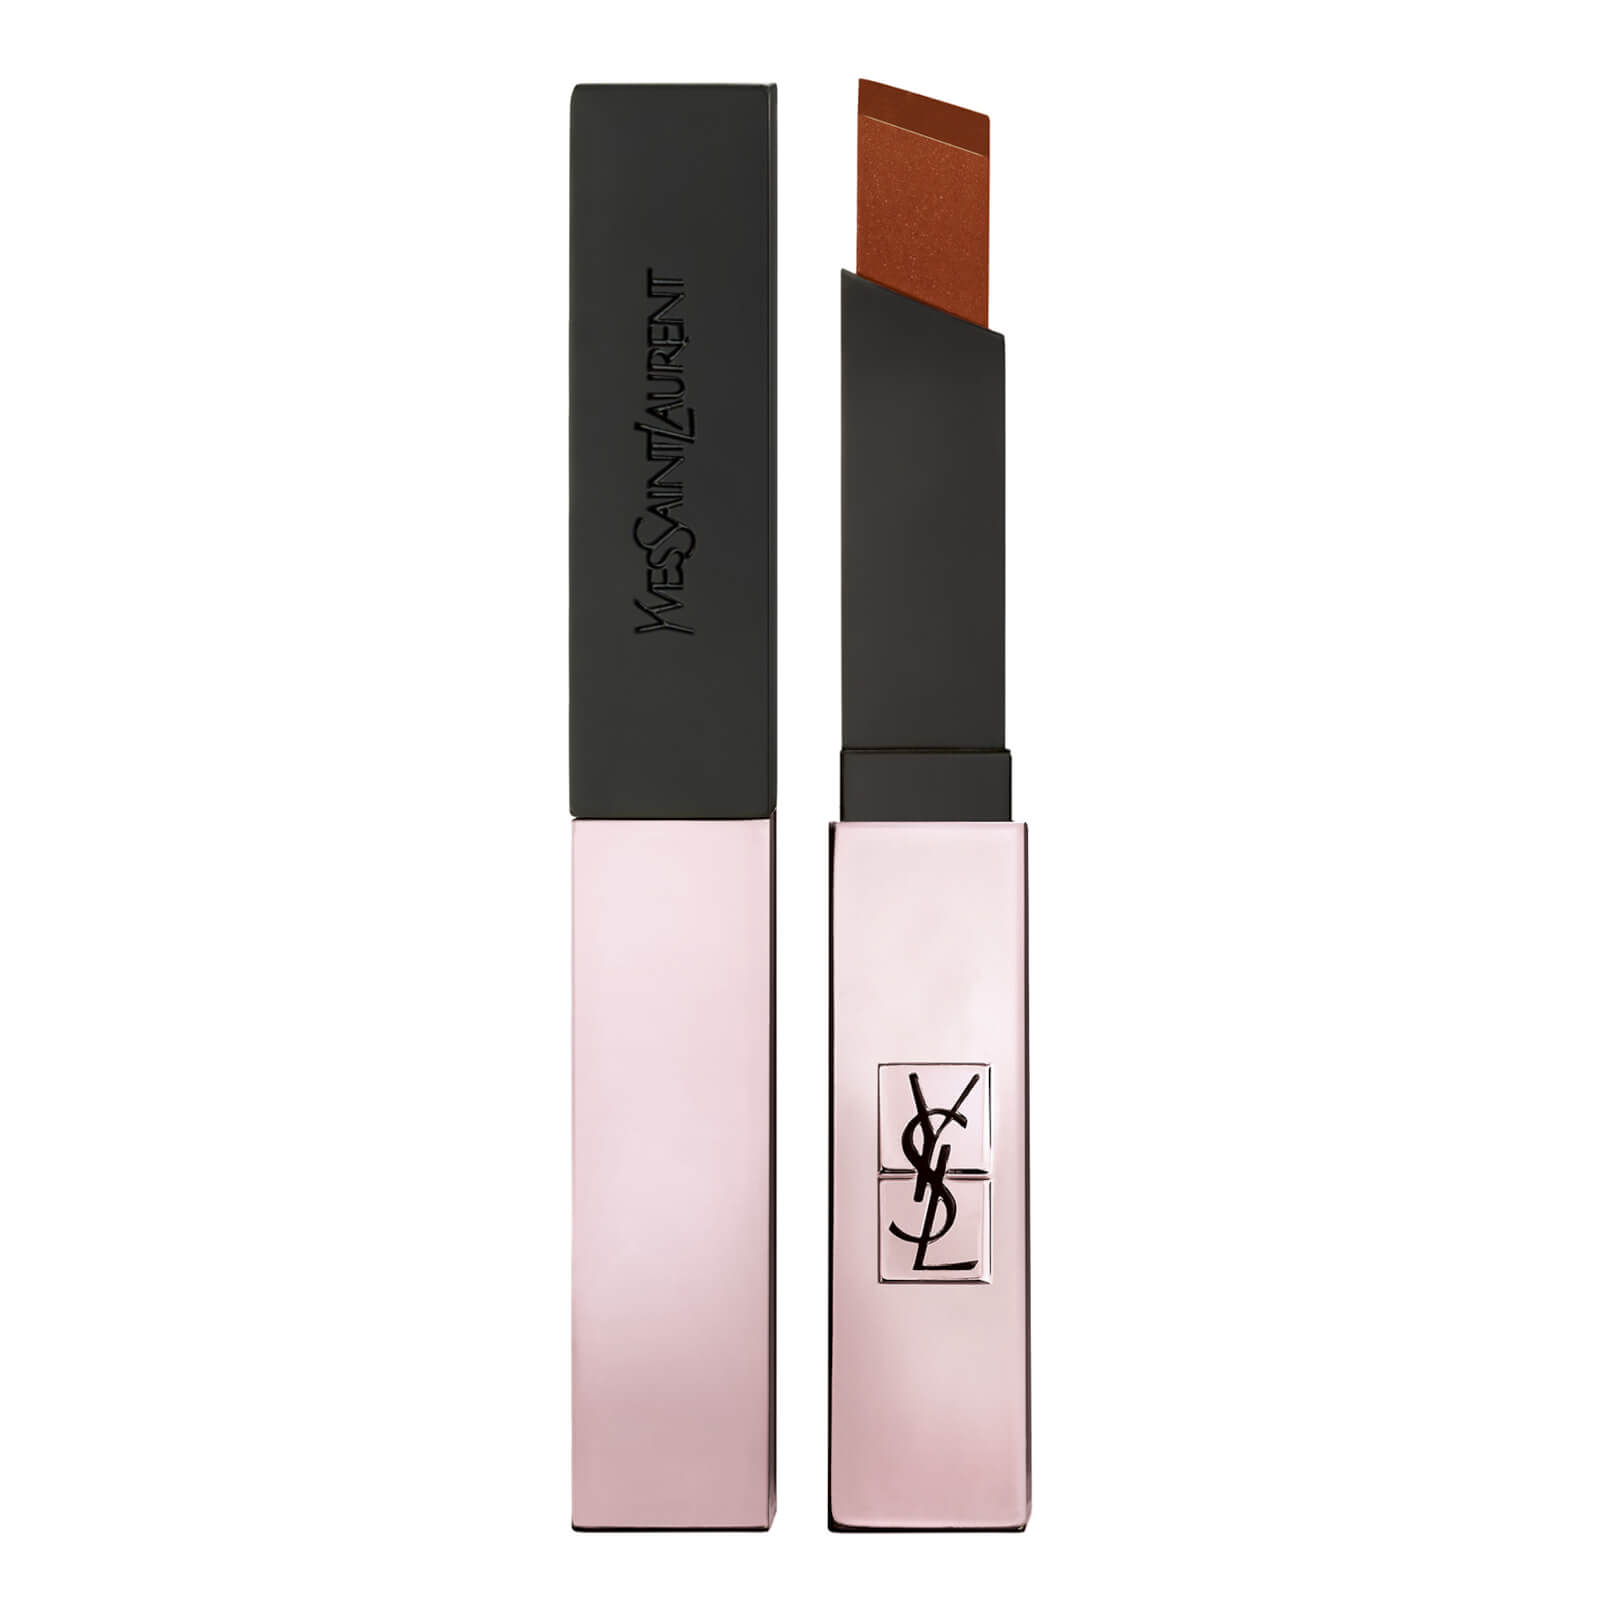 Yves Saint Laurent Rouge Pur Couture The Slim Glow Matte Lipstick 2g (Various Shades) - 214 No Taboo